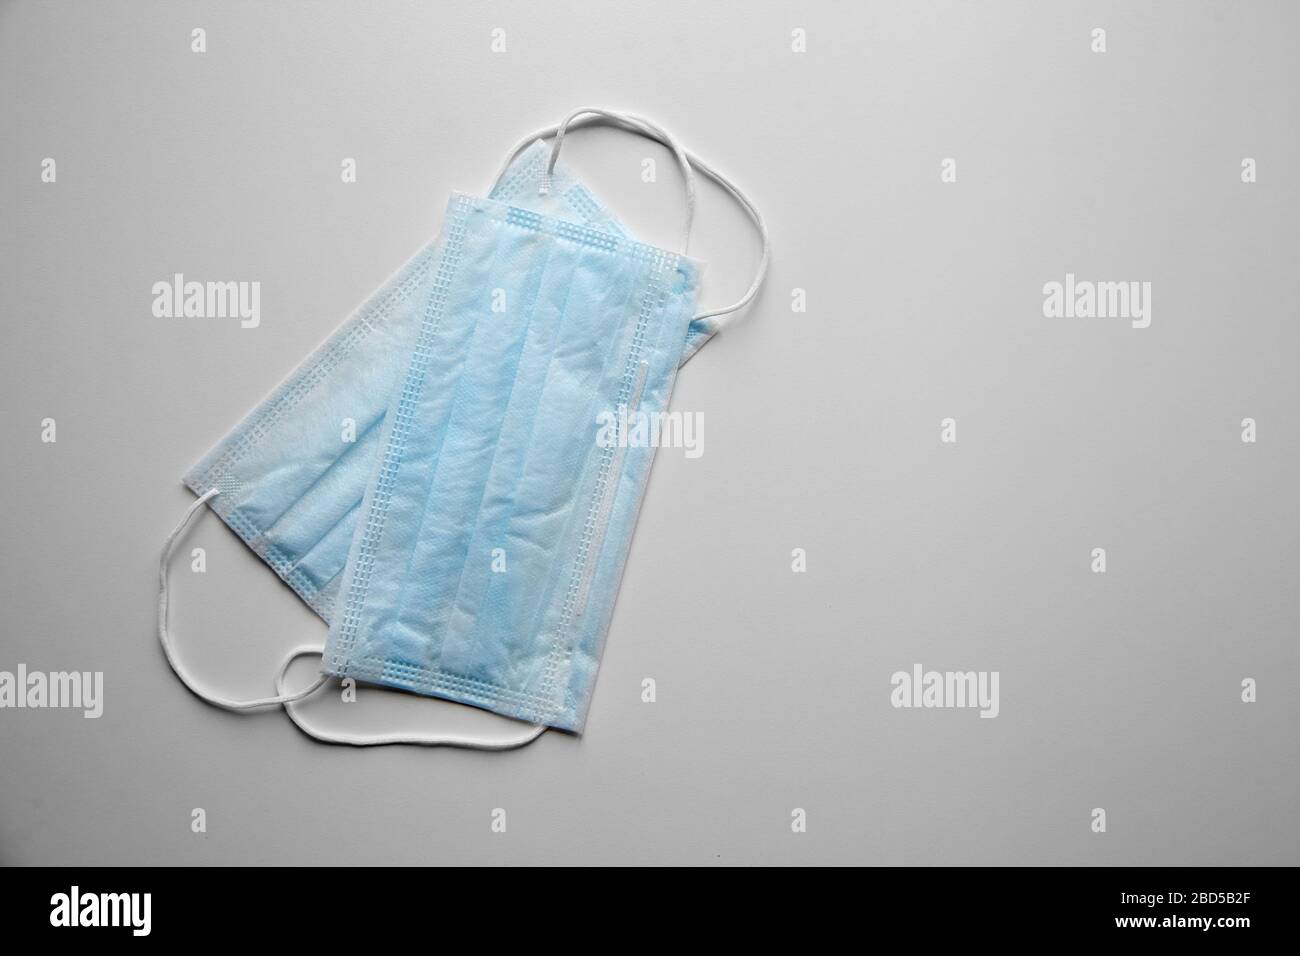 Face masks reduce the chance of spreading airborne diseases. Blue disposable medical sanitary surgical masks on white table, top view. Shortage of sur Stock Photo